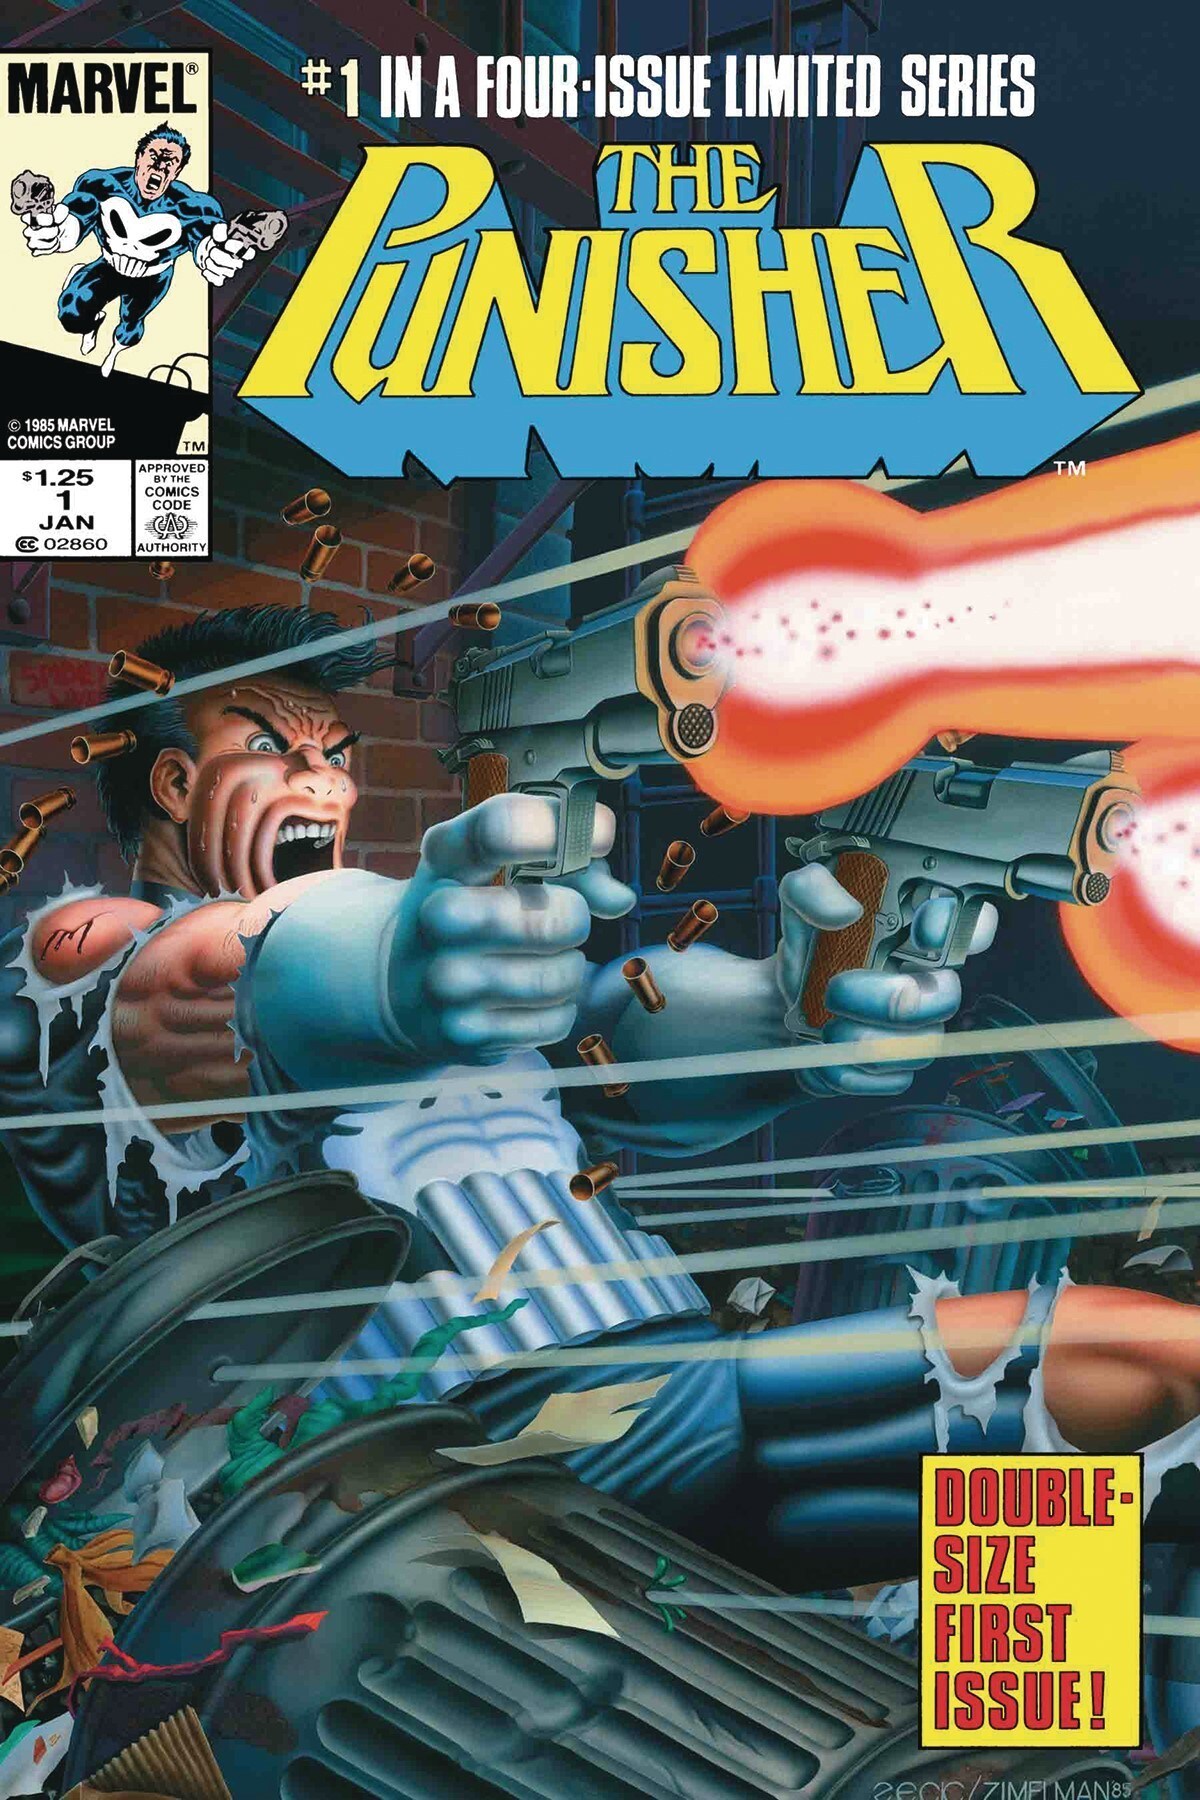 The Punisher #'